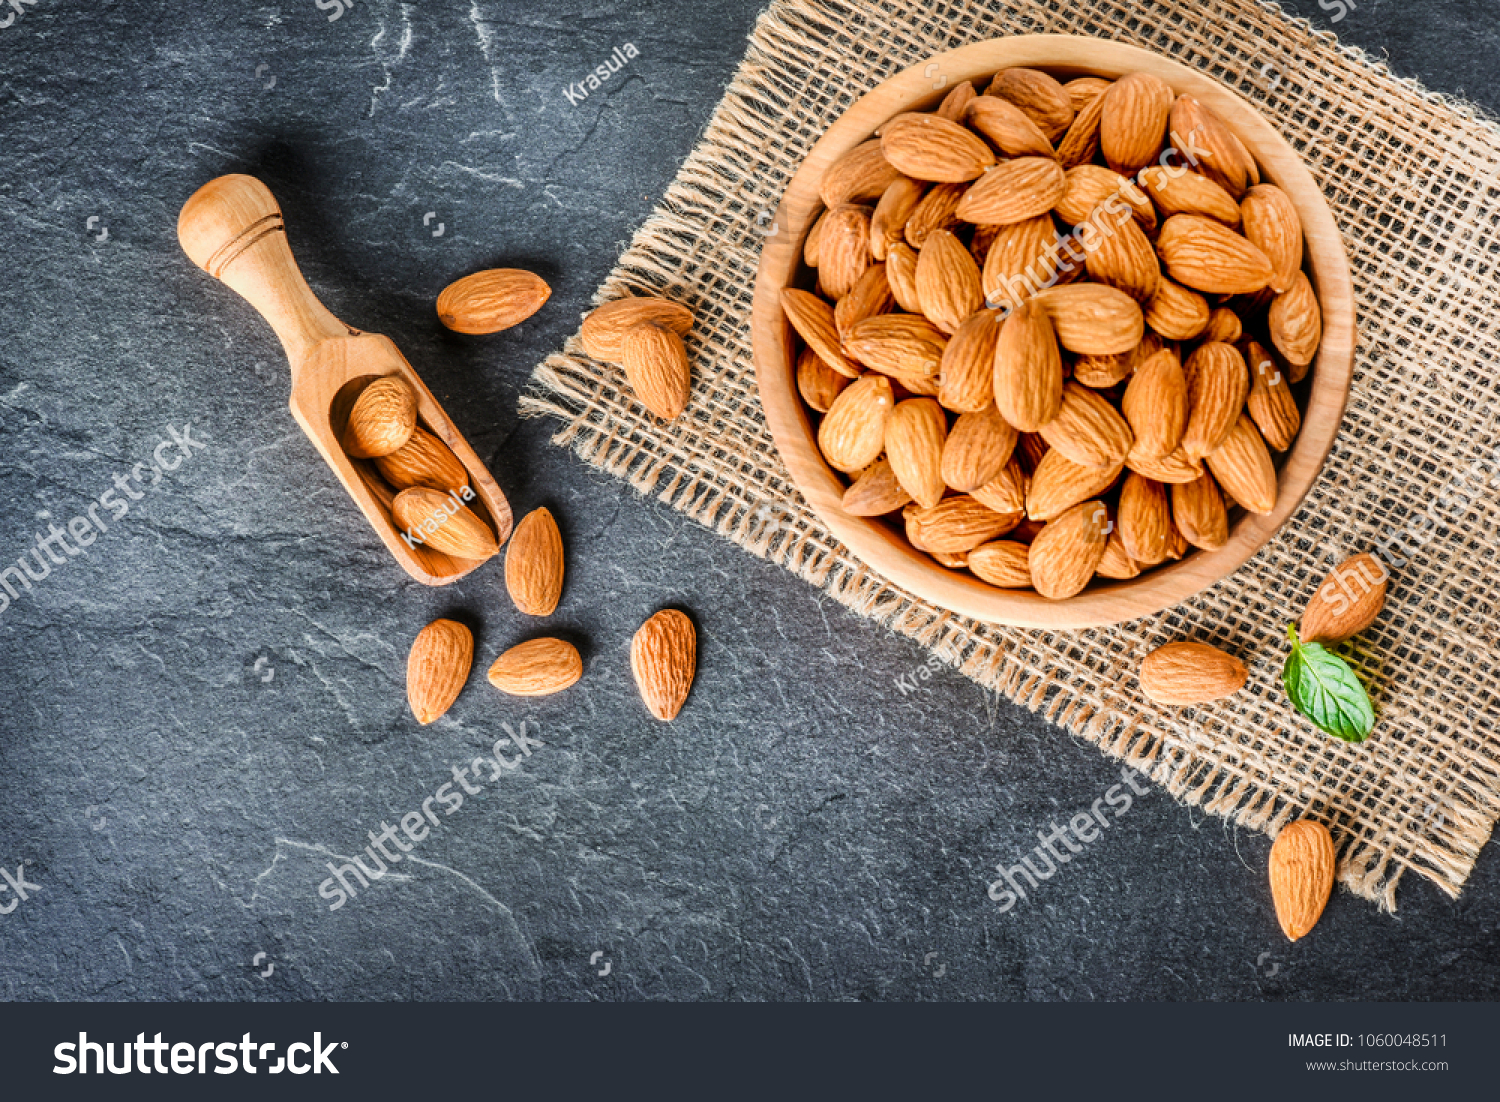 Top view of almonds on dark stone table with wood spoon or scoop. Almond in wooden bowl. Nuts freely laid on dark board. #1060048511